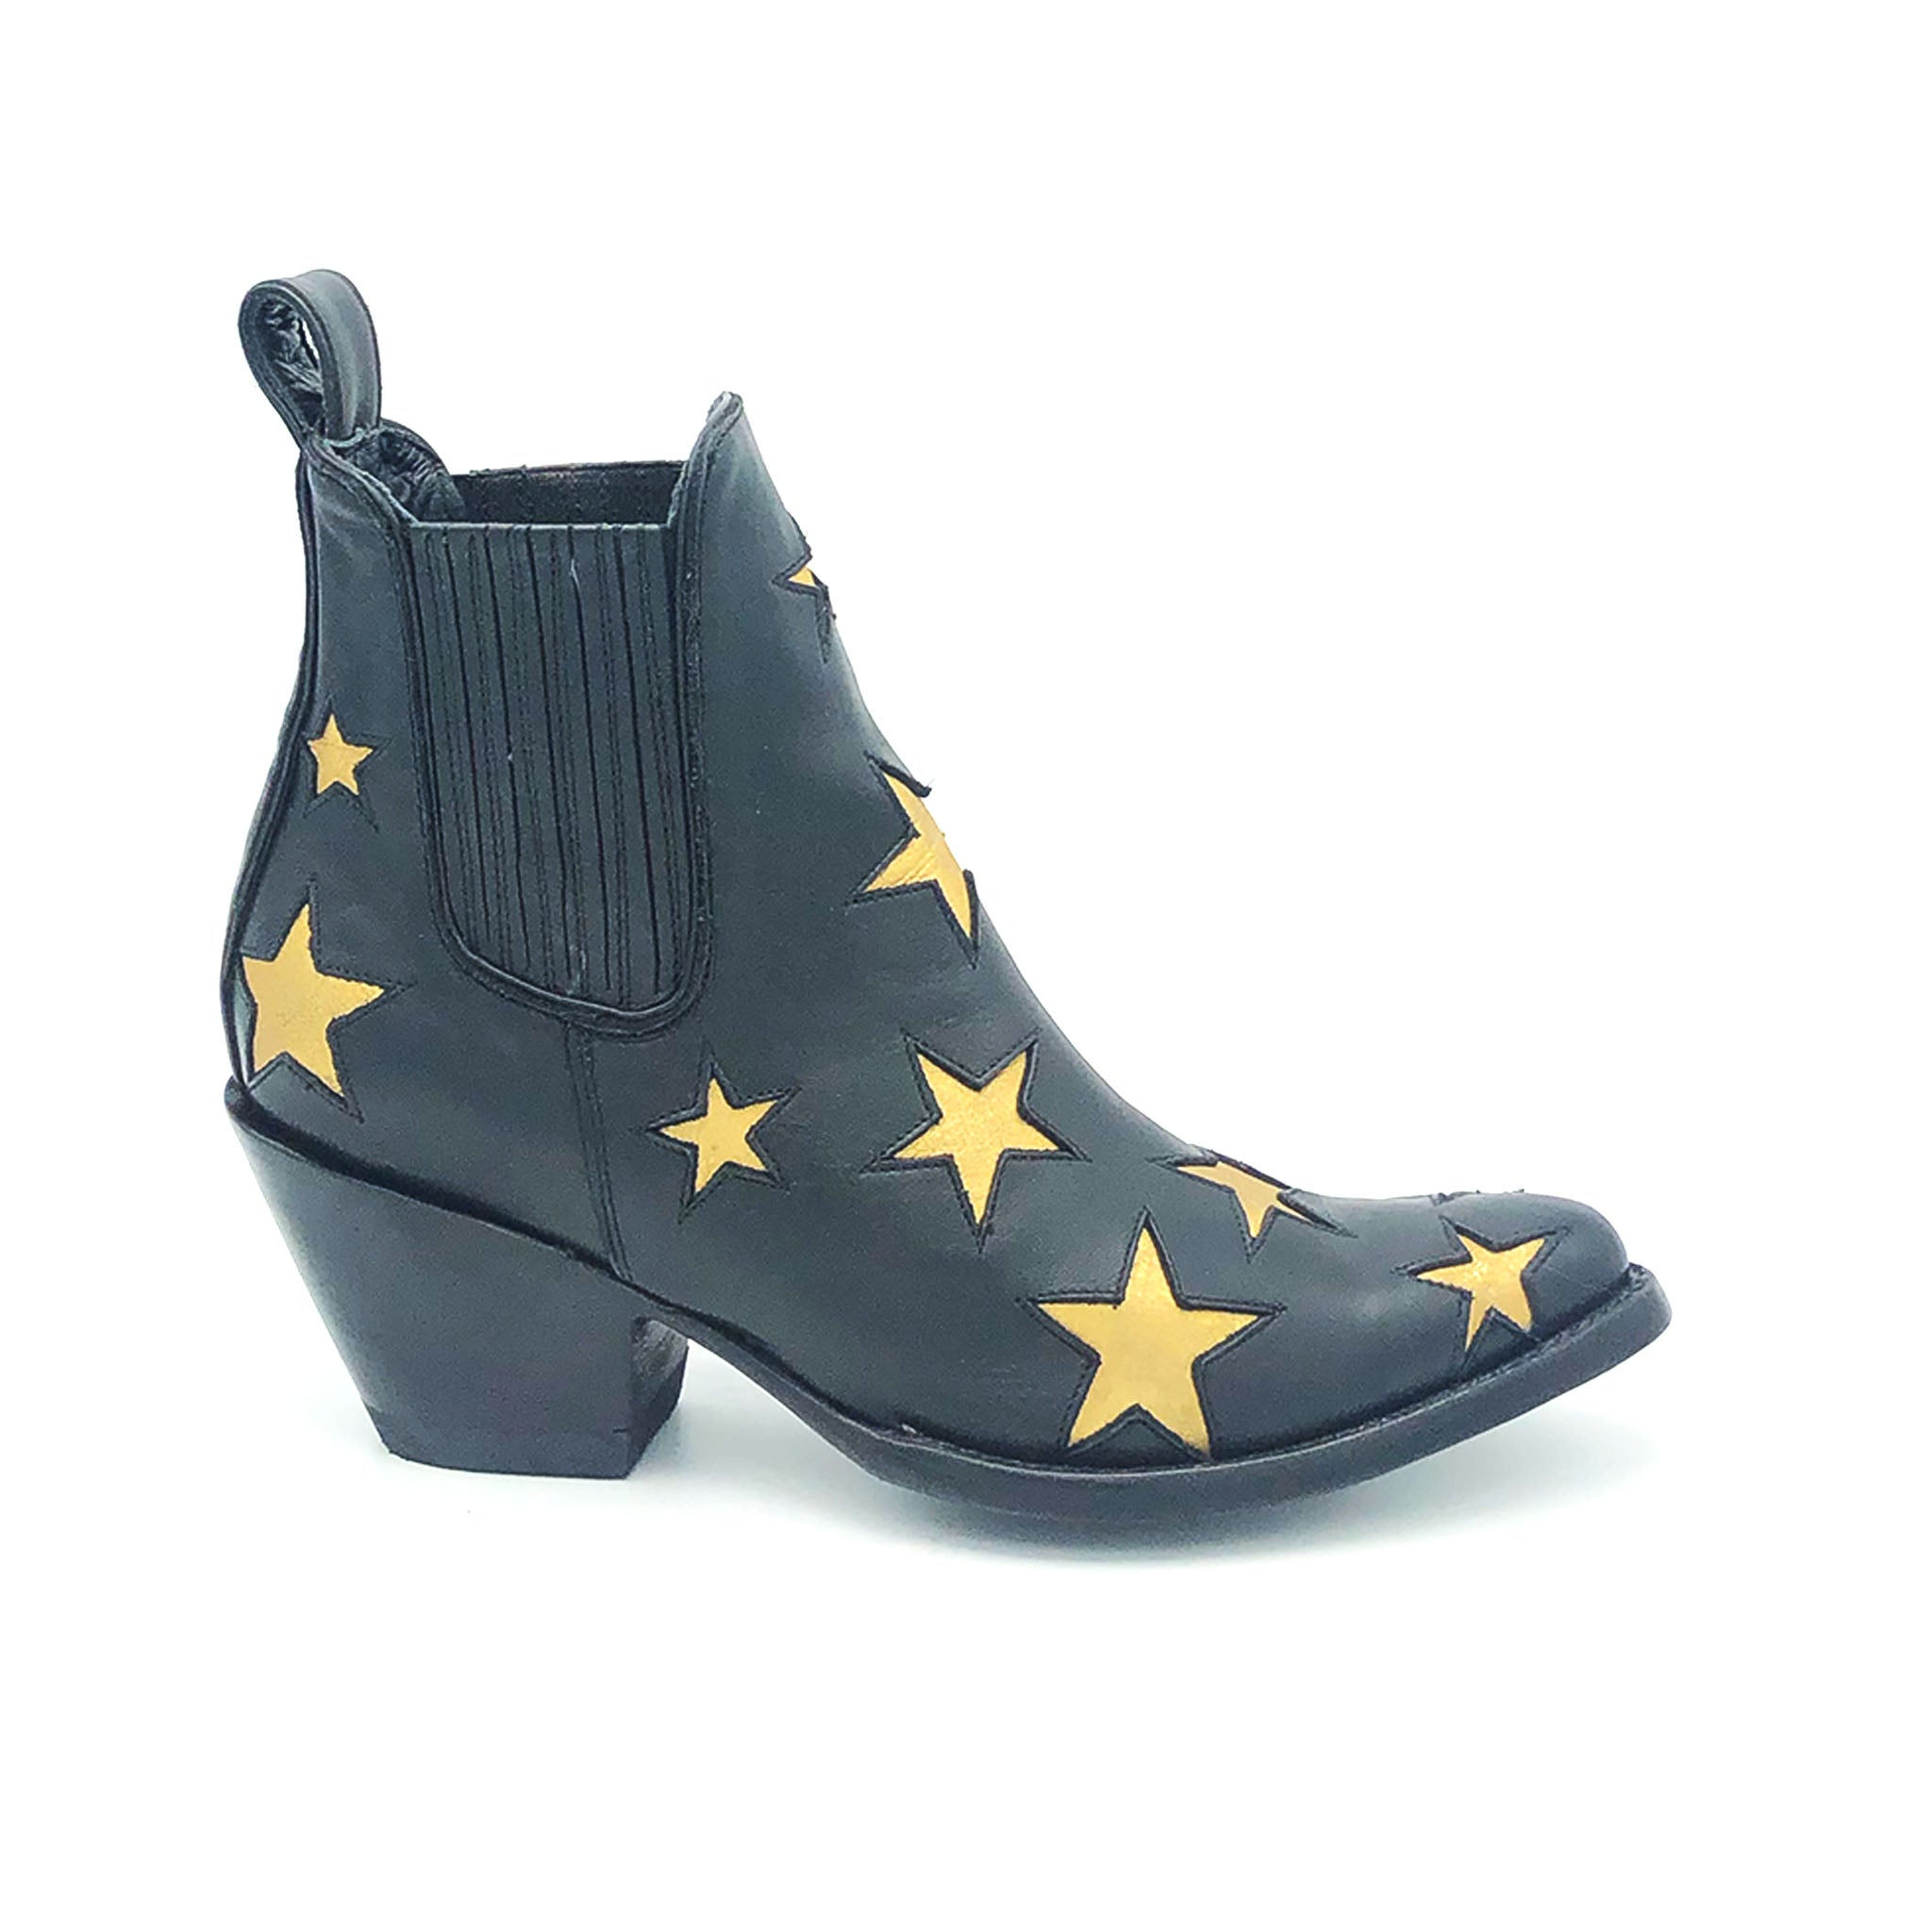 black ankle boots with stars